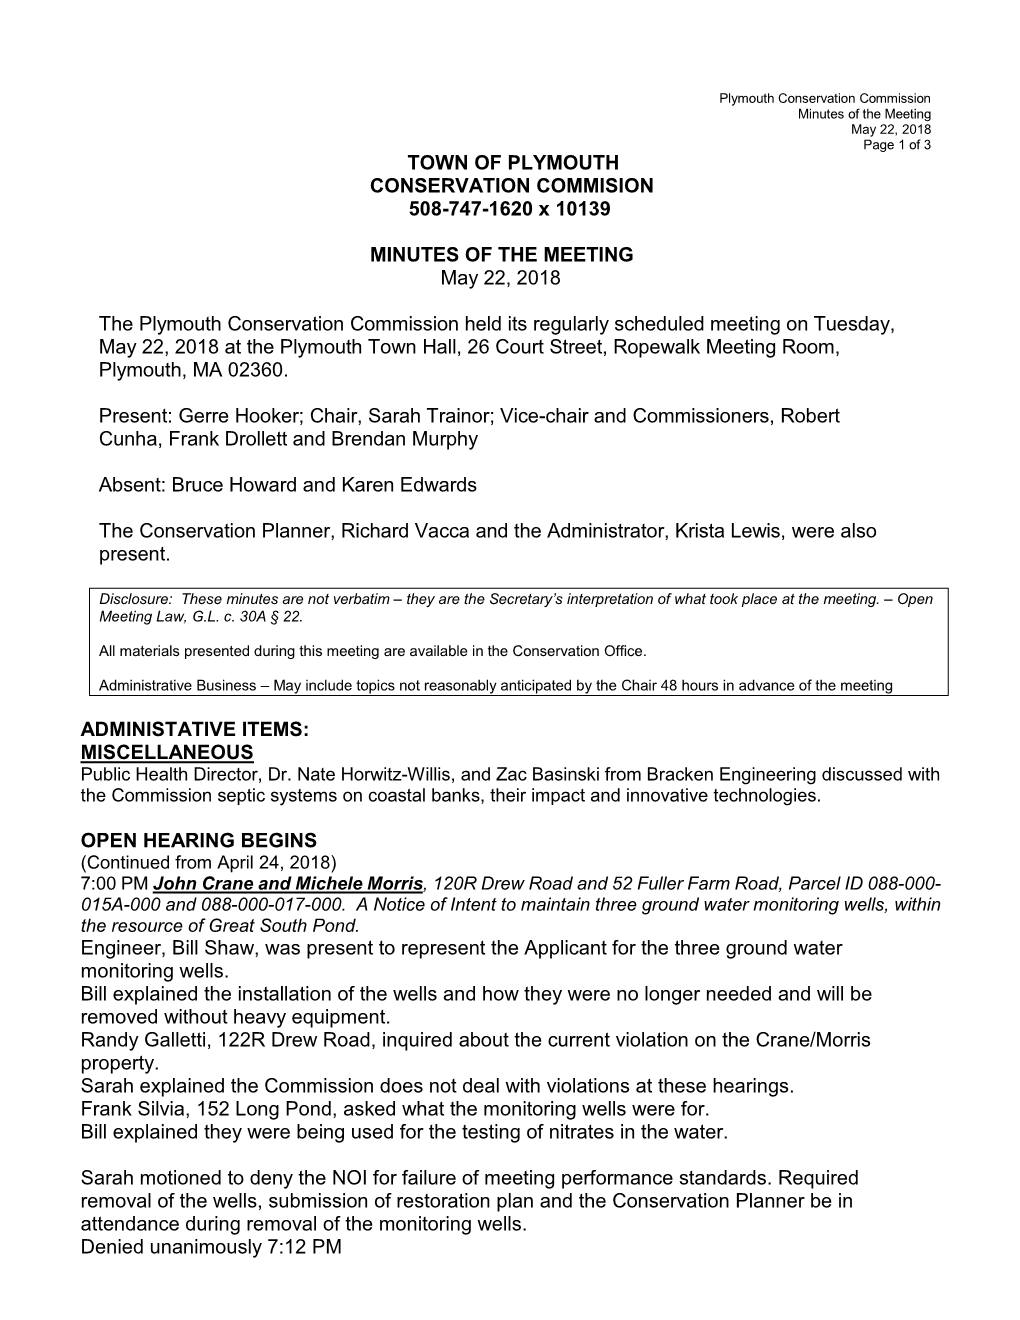 Conservation Commission Minutes of the Meeting May 22, 2018 Page 1 of 3 TOWN of PLYMOUTH CONSERVATION COMMISION 508-747-1620 X 10139